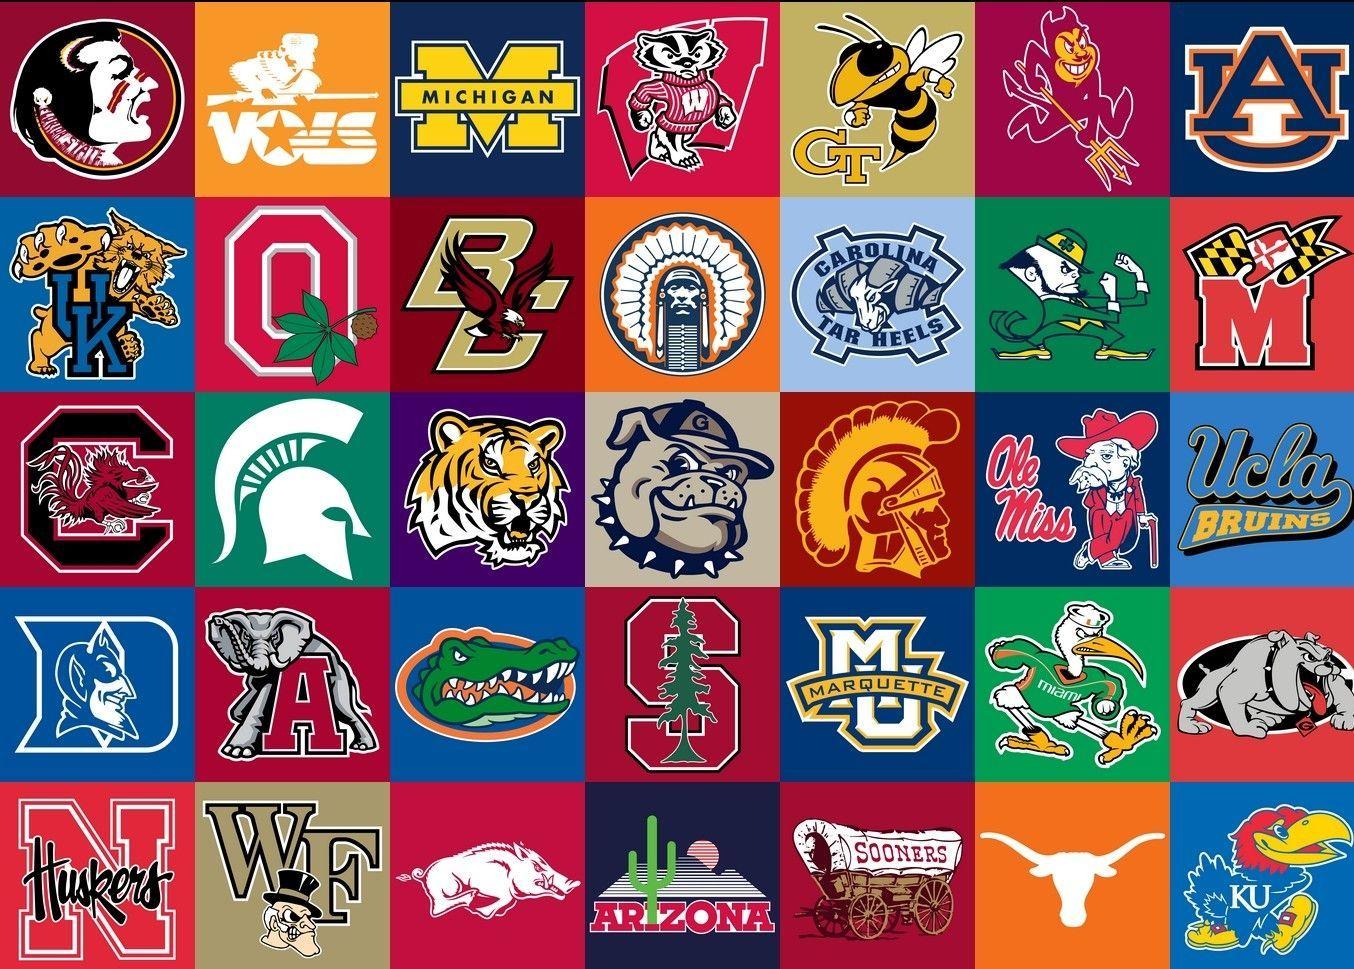 All College Football Logo - Pin by David E. on COLLEGE SPORTS | College football, Football ...